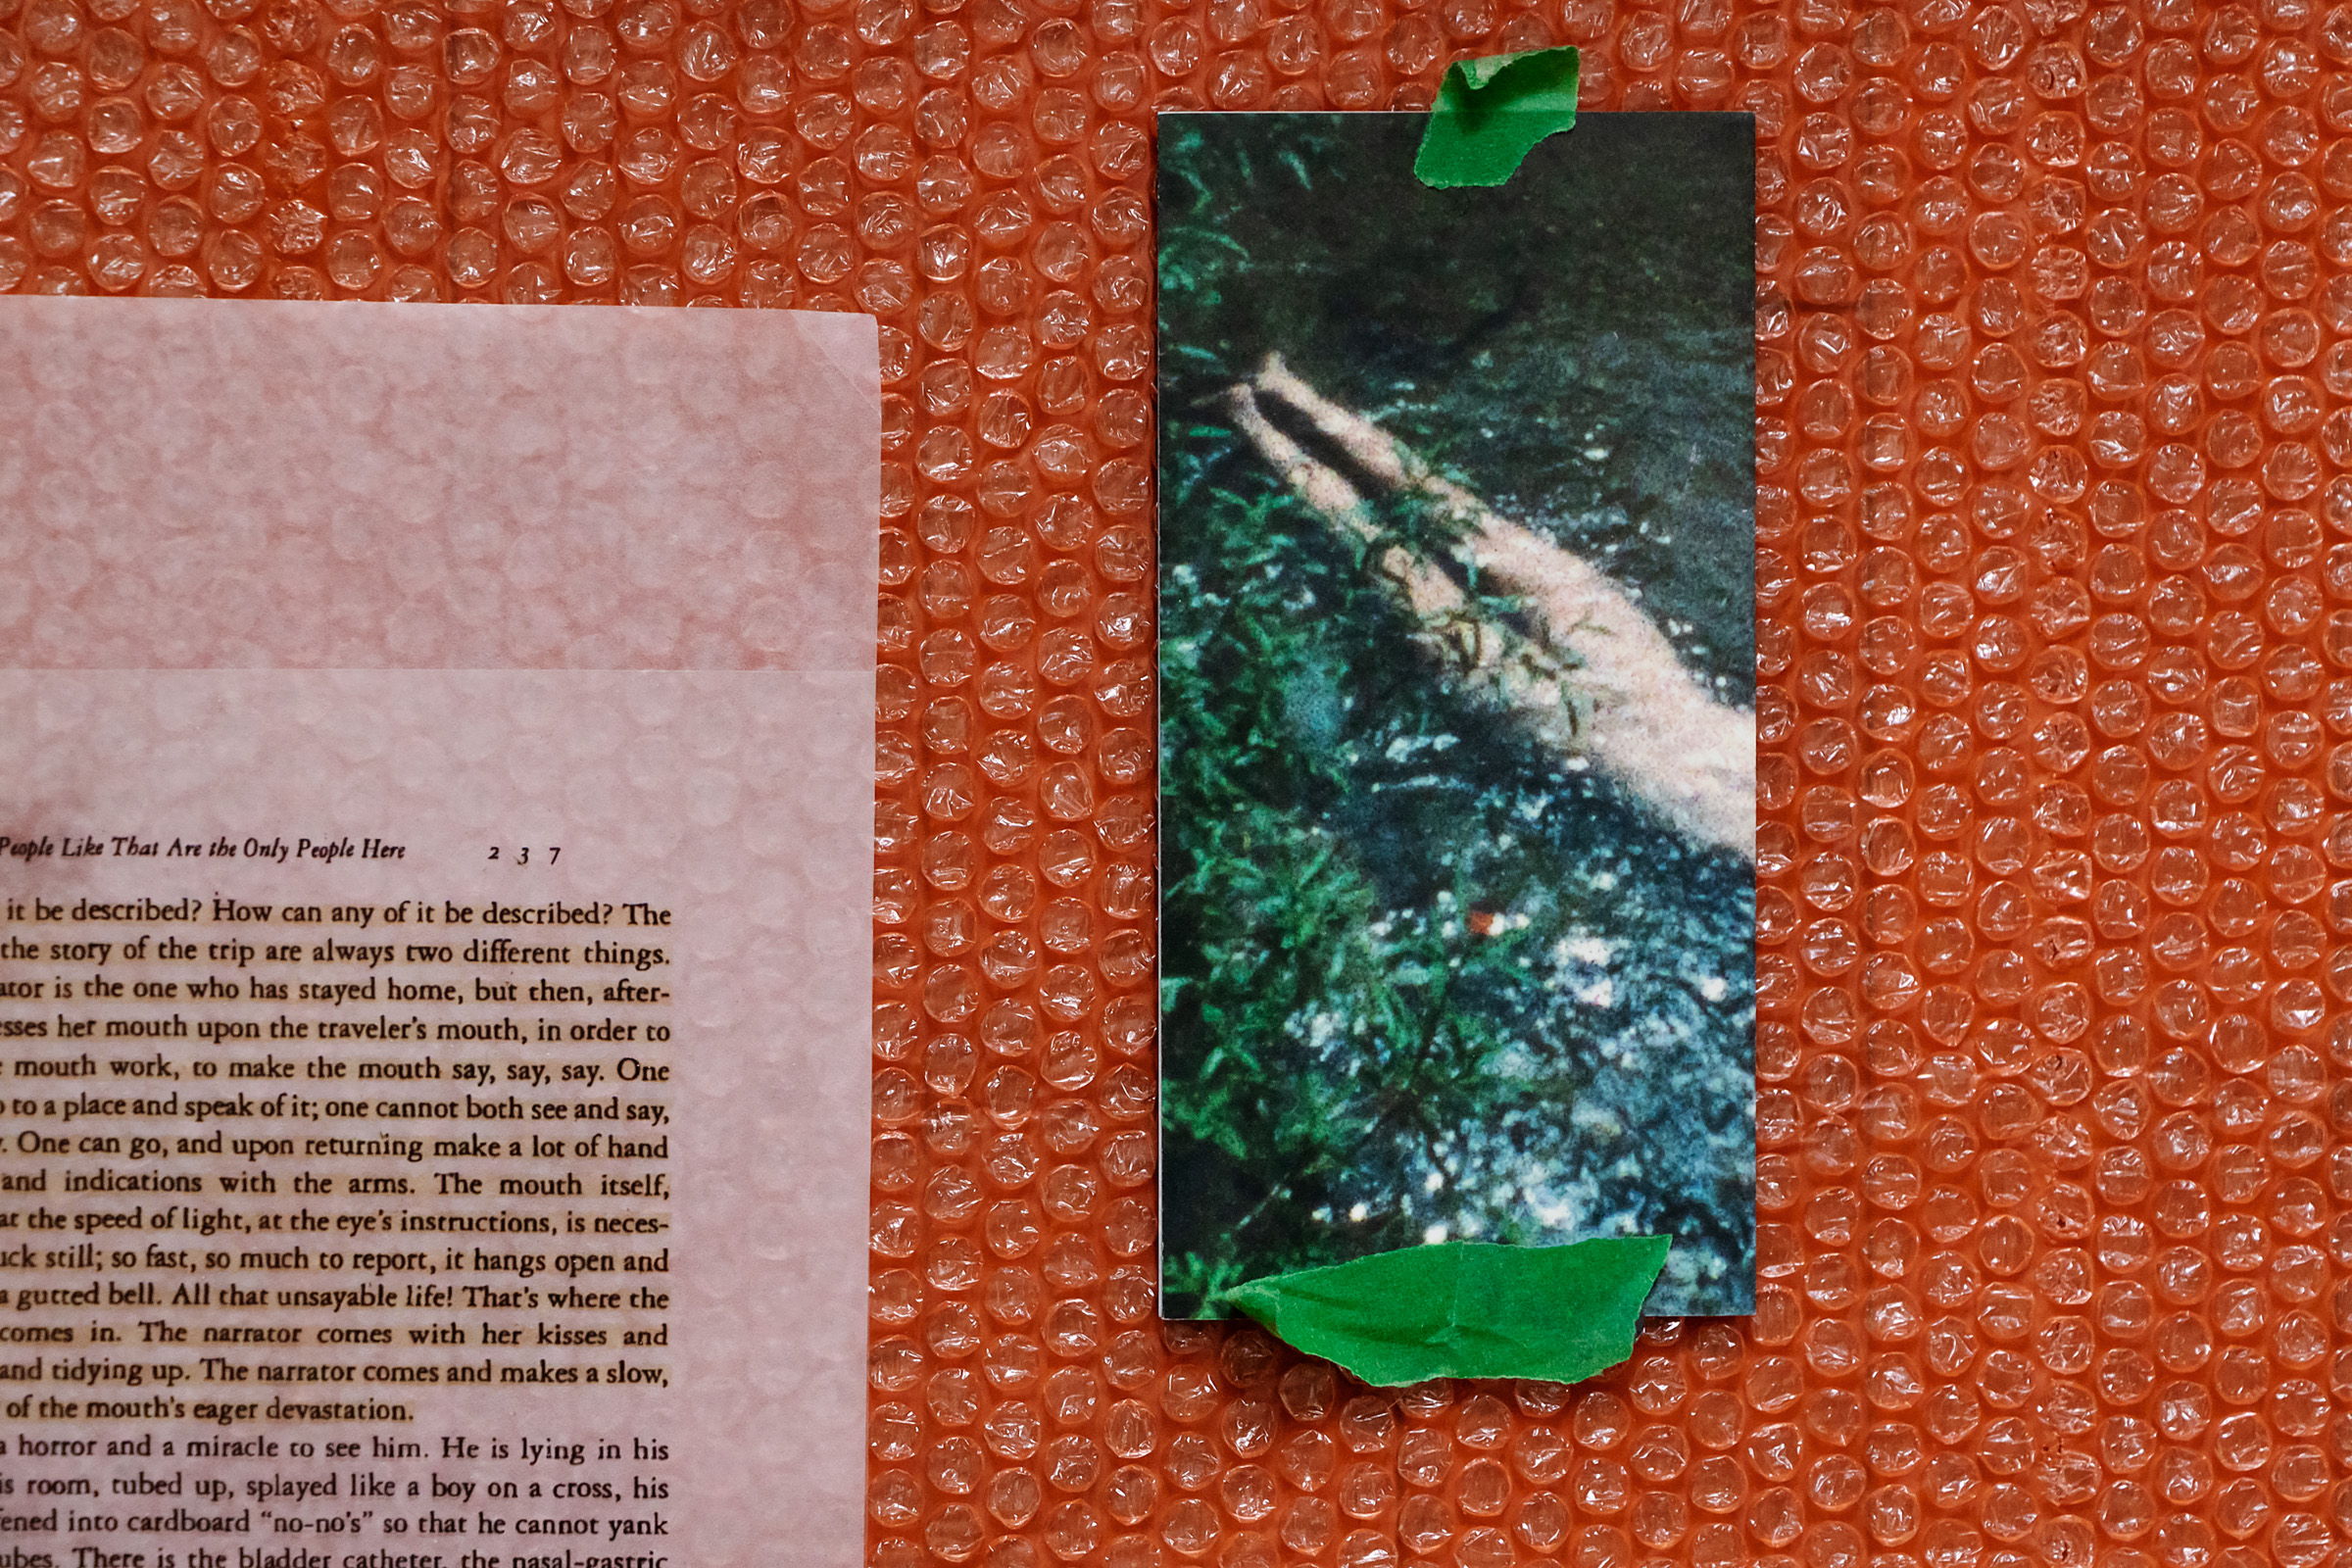     Zahra Komeylian, Raw Silk and Uncut Wood, (detail) (catalog image of Ana Mendieta&#8217;s Creek (1974), bubble wrap, glassine, acetate print), from the series Water over marsh, 2022. Courtesy of the artist

